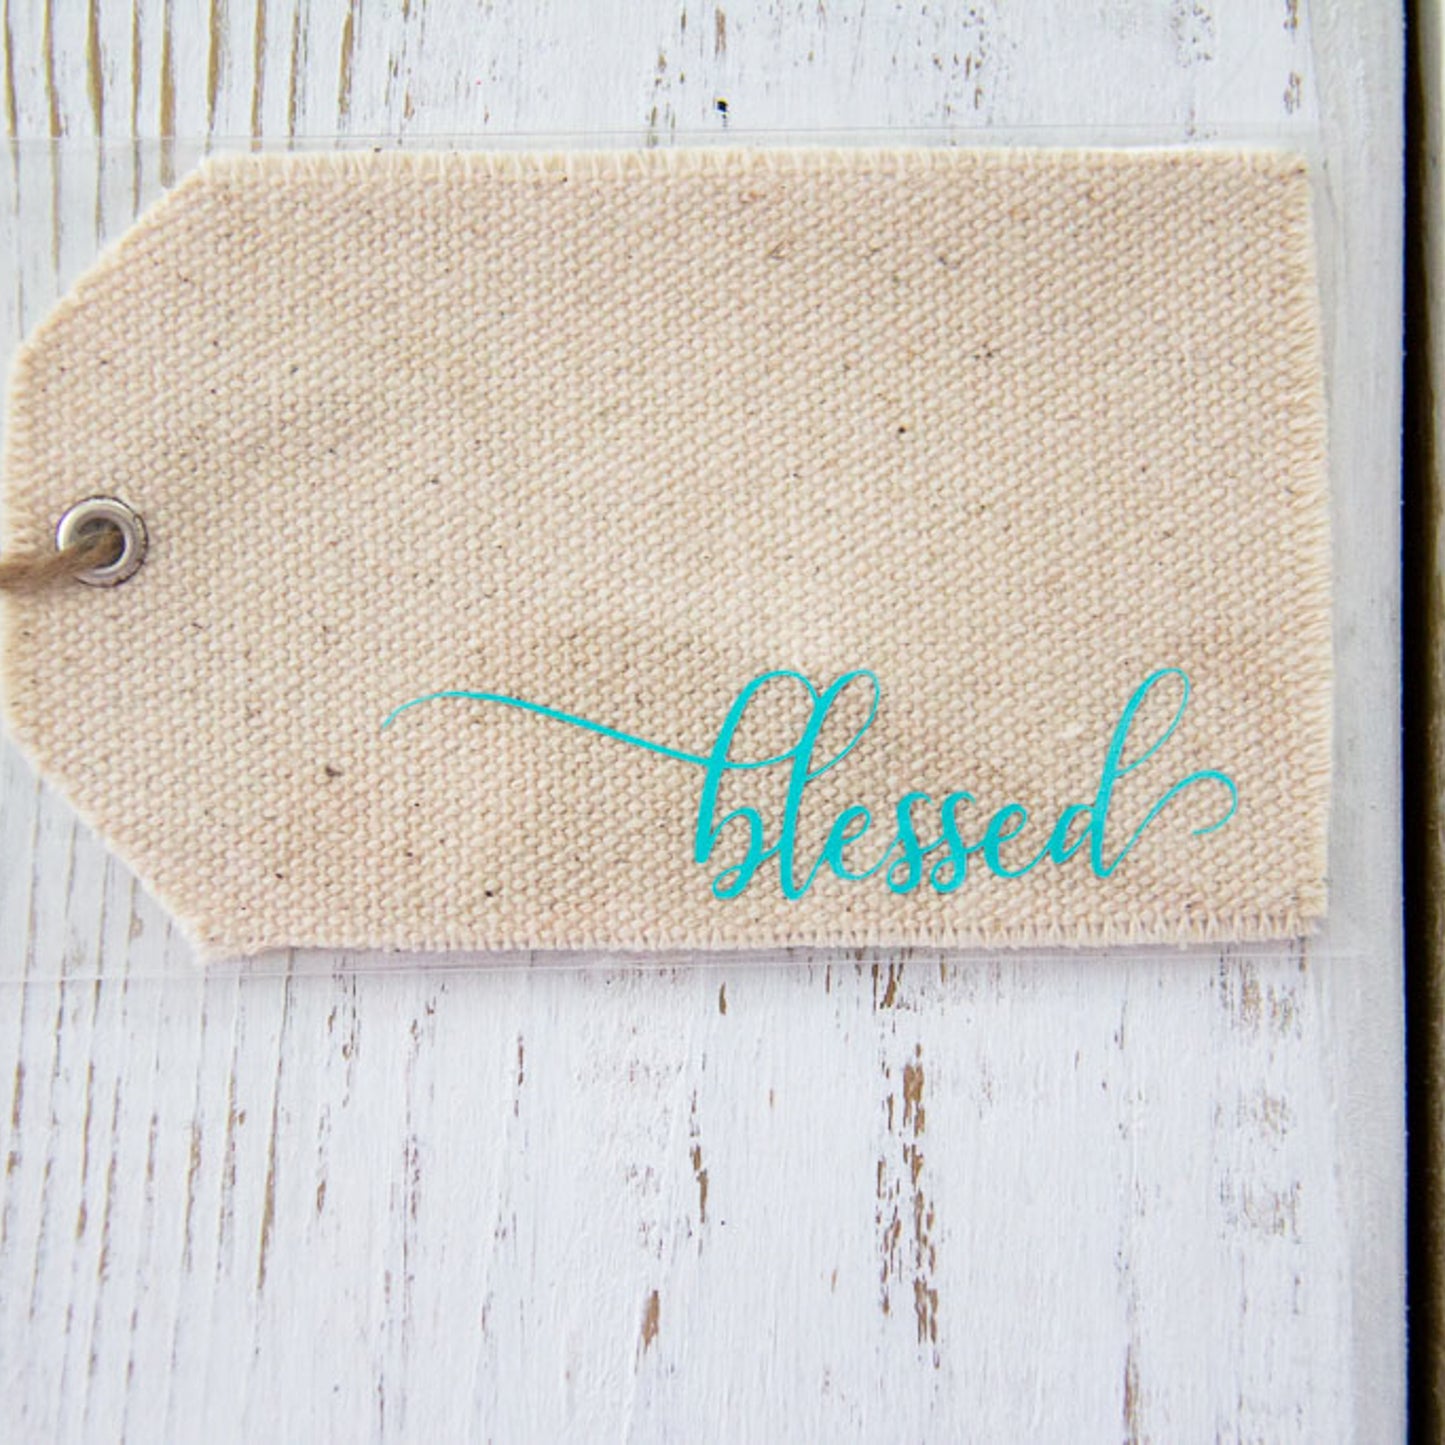 Blessed - Canvas Gift Tag